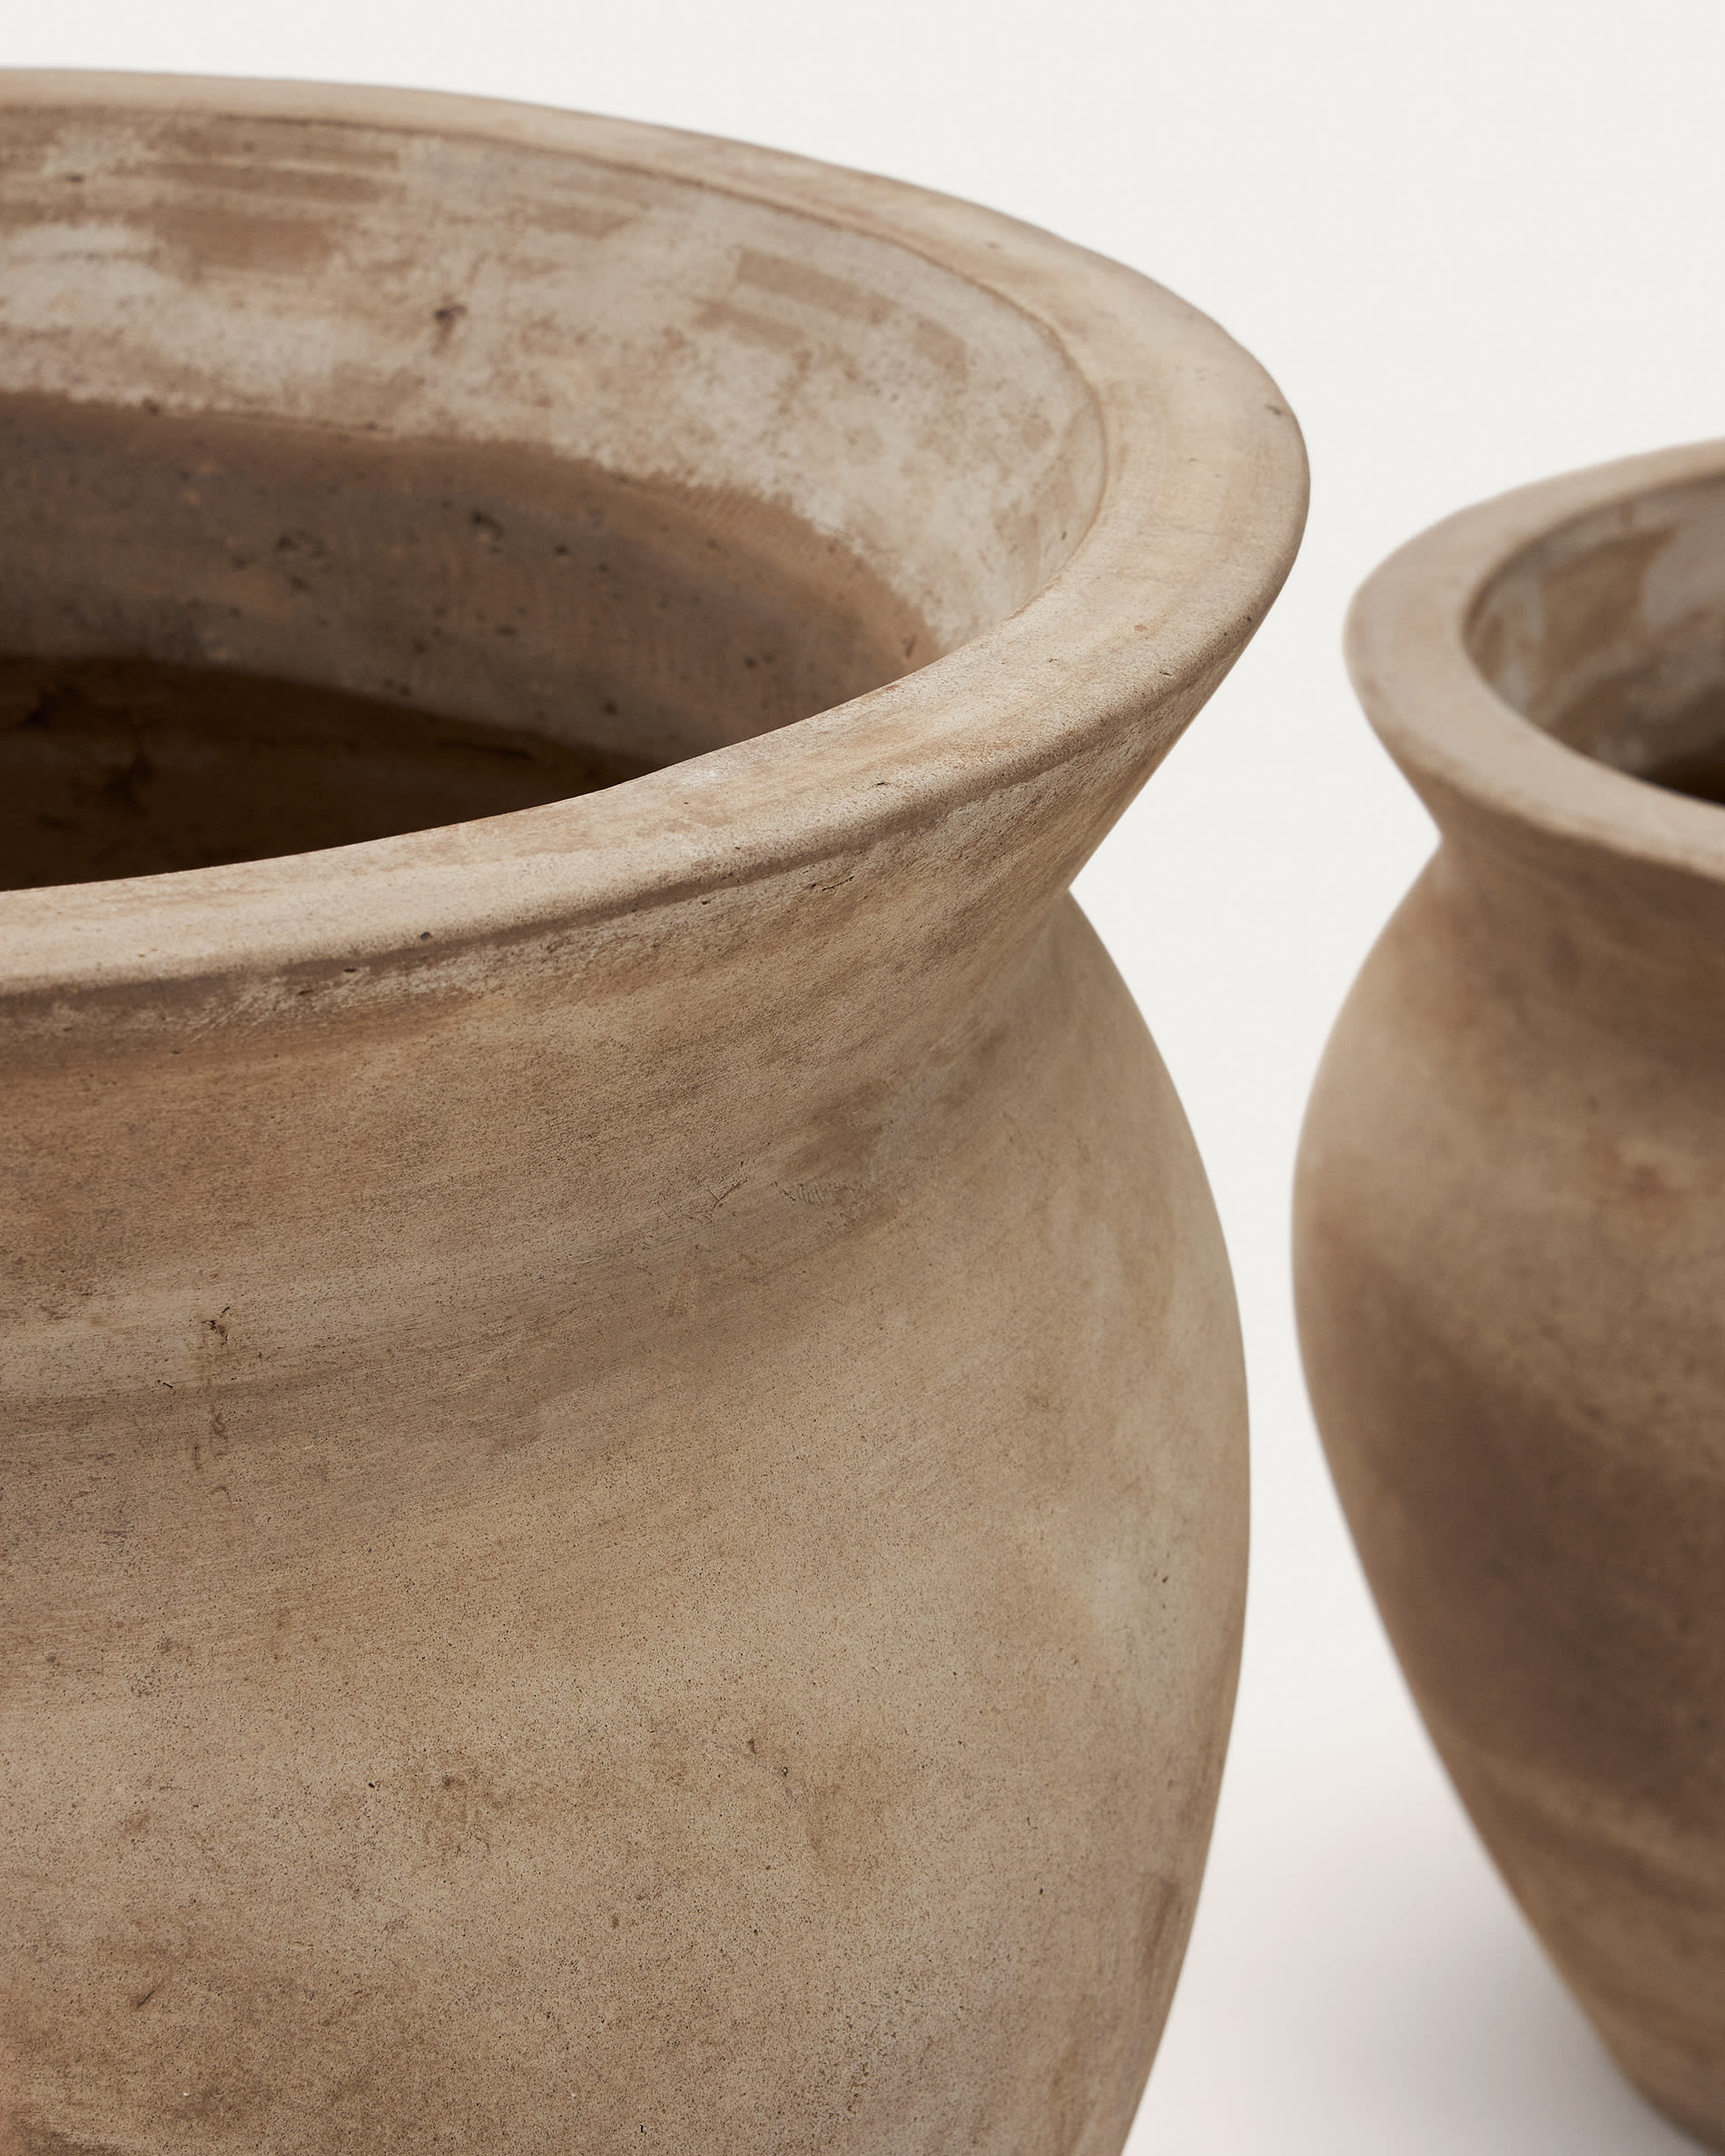 Binidali set of 2 terracotta planters with natural finish Ø 45 / 31.5 cm |  Kave Home